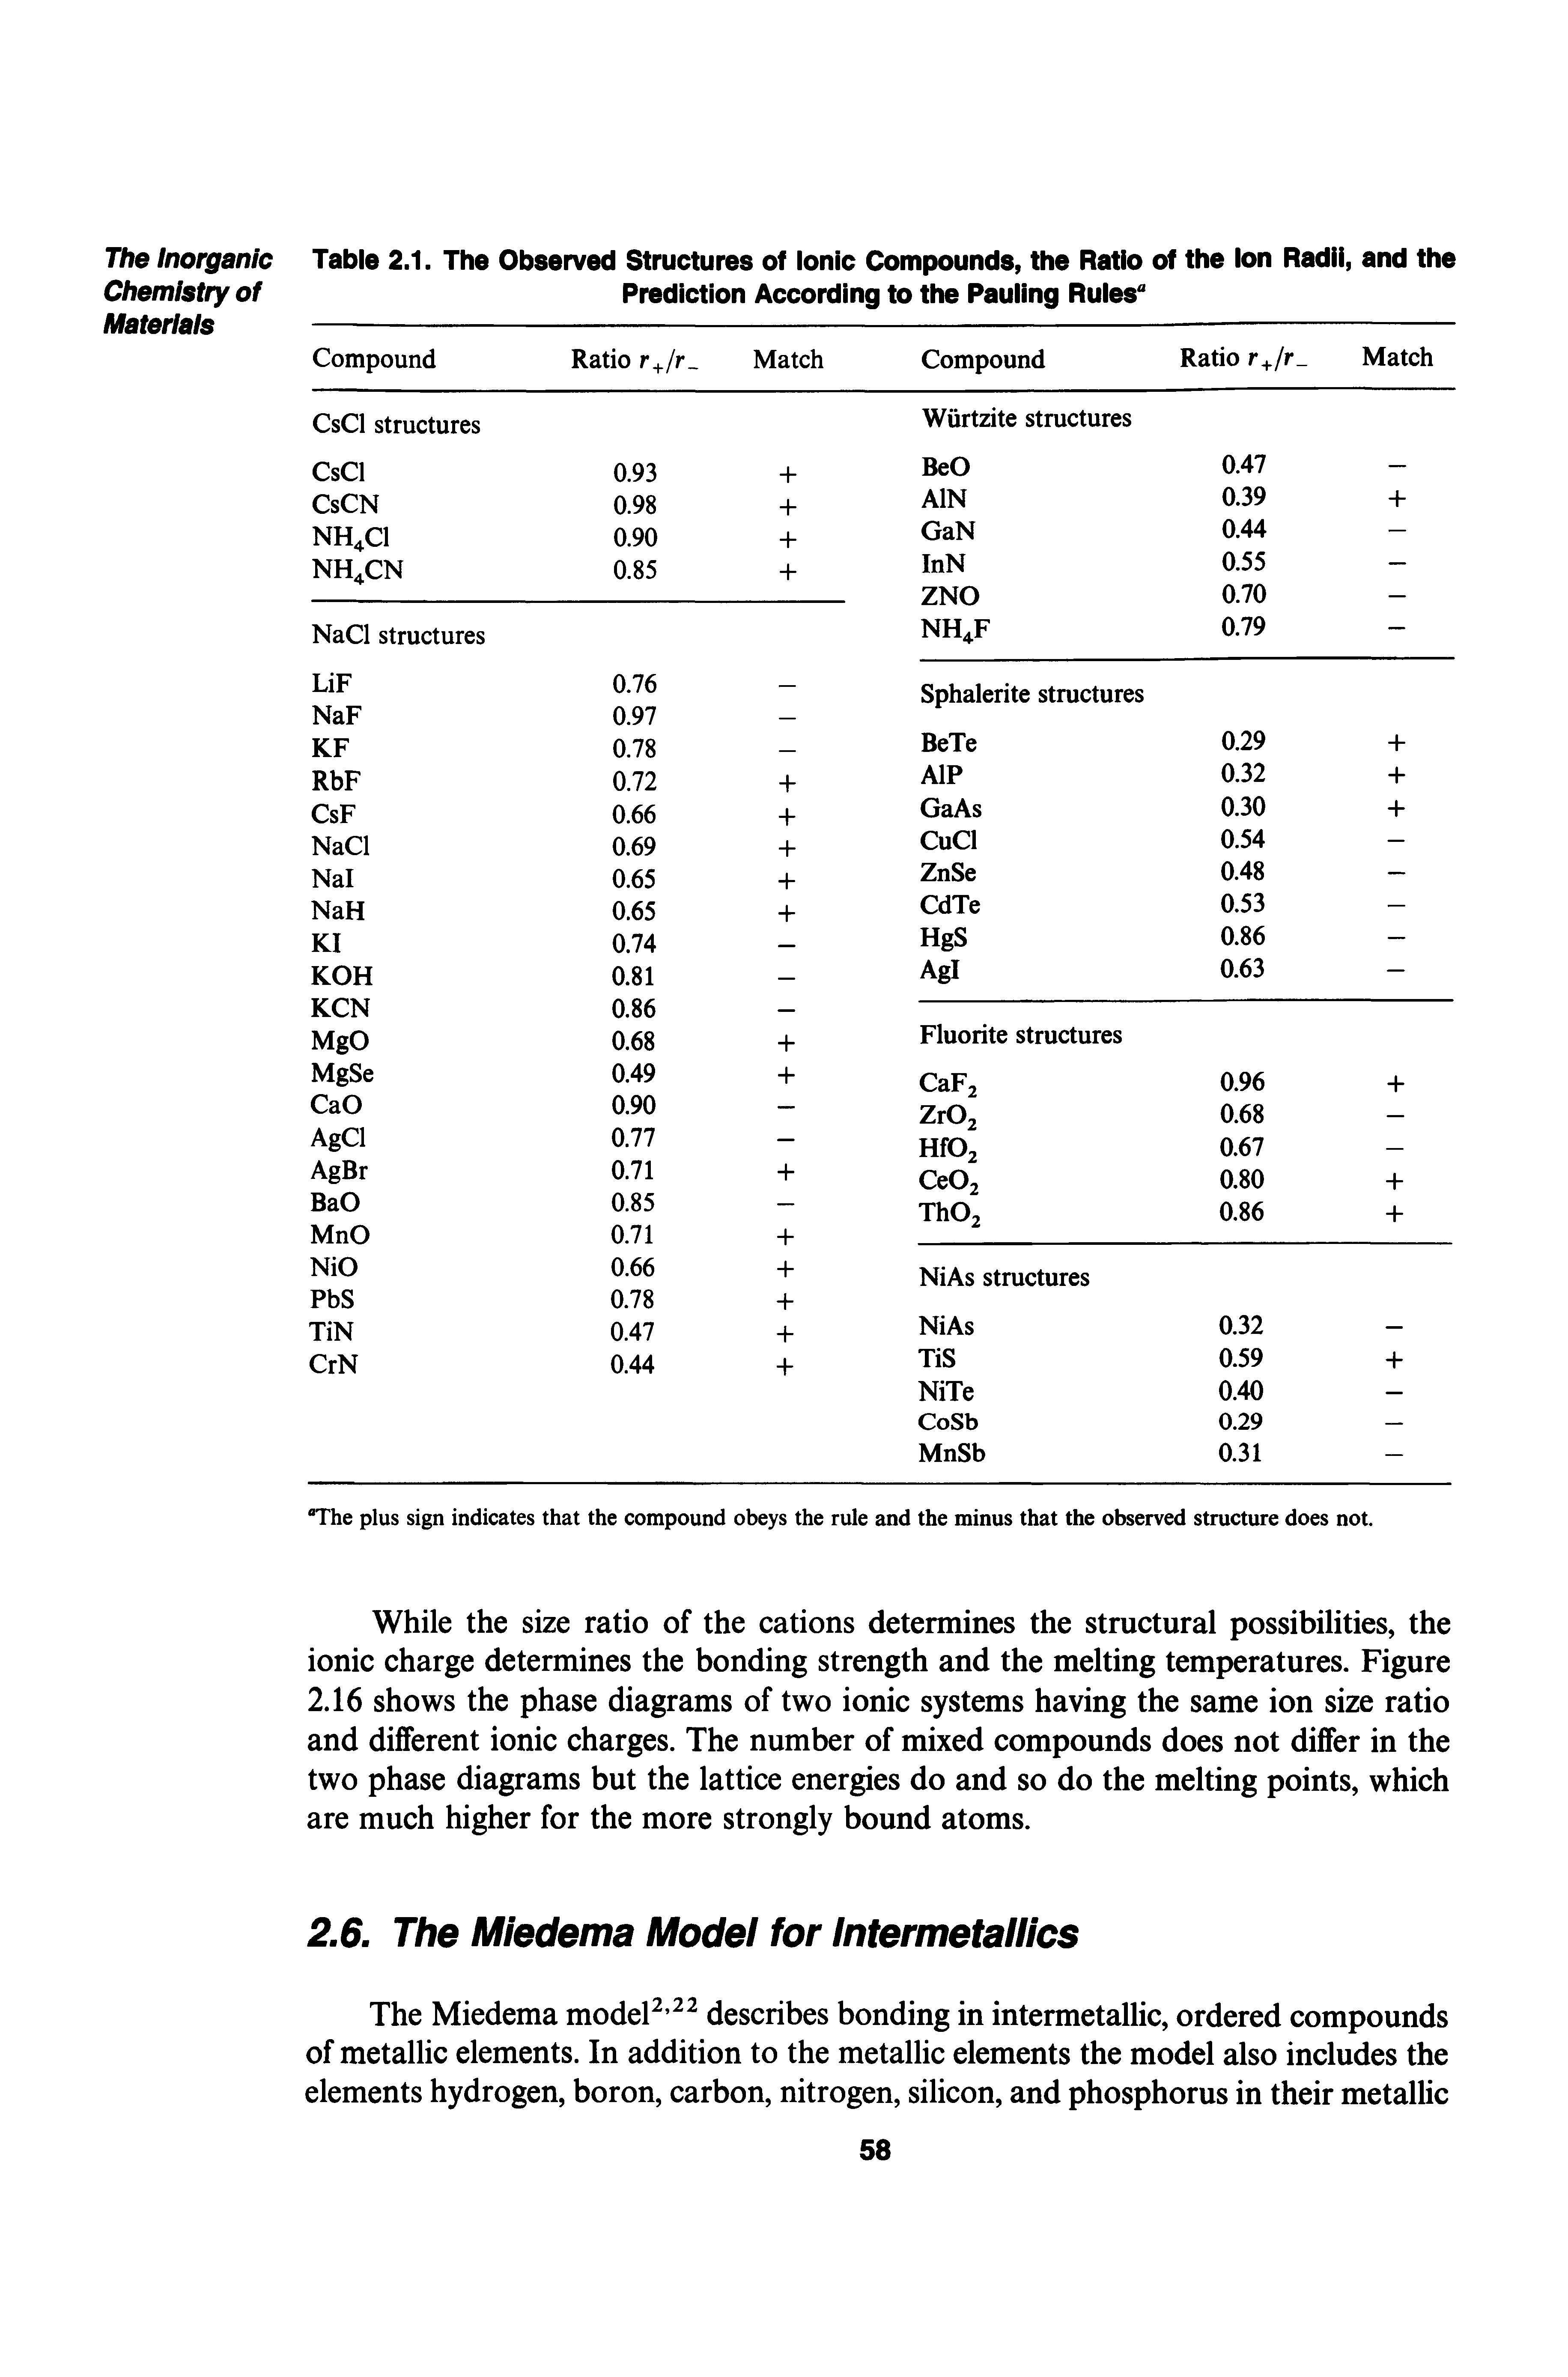 Table 2.1. The Observed Structures of Ionic Compounds, the Ratio of the Ion Radii, and the Prediction According to the Pauling Rules ...